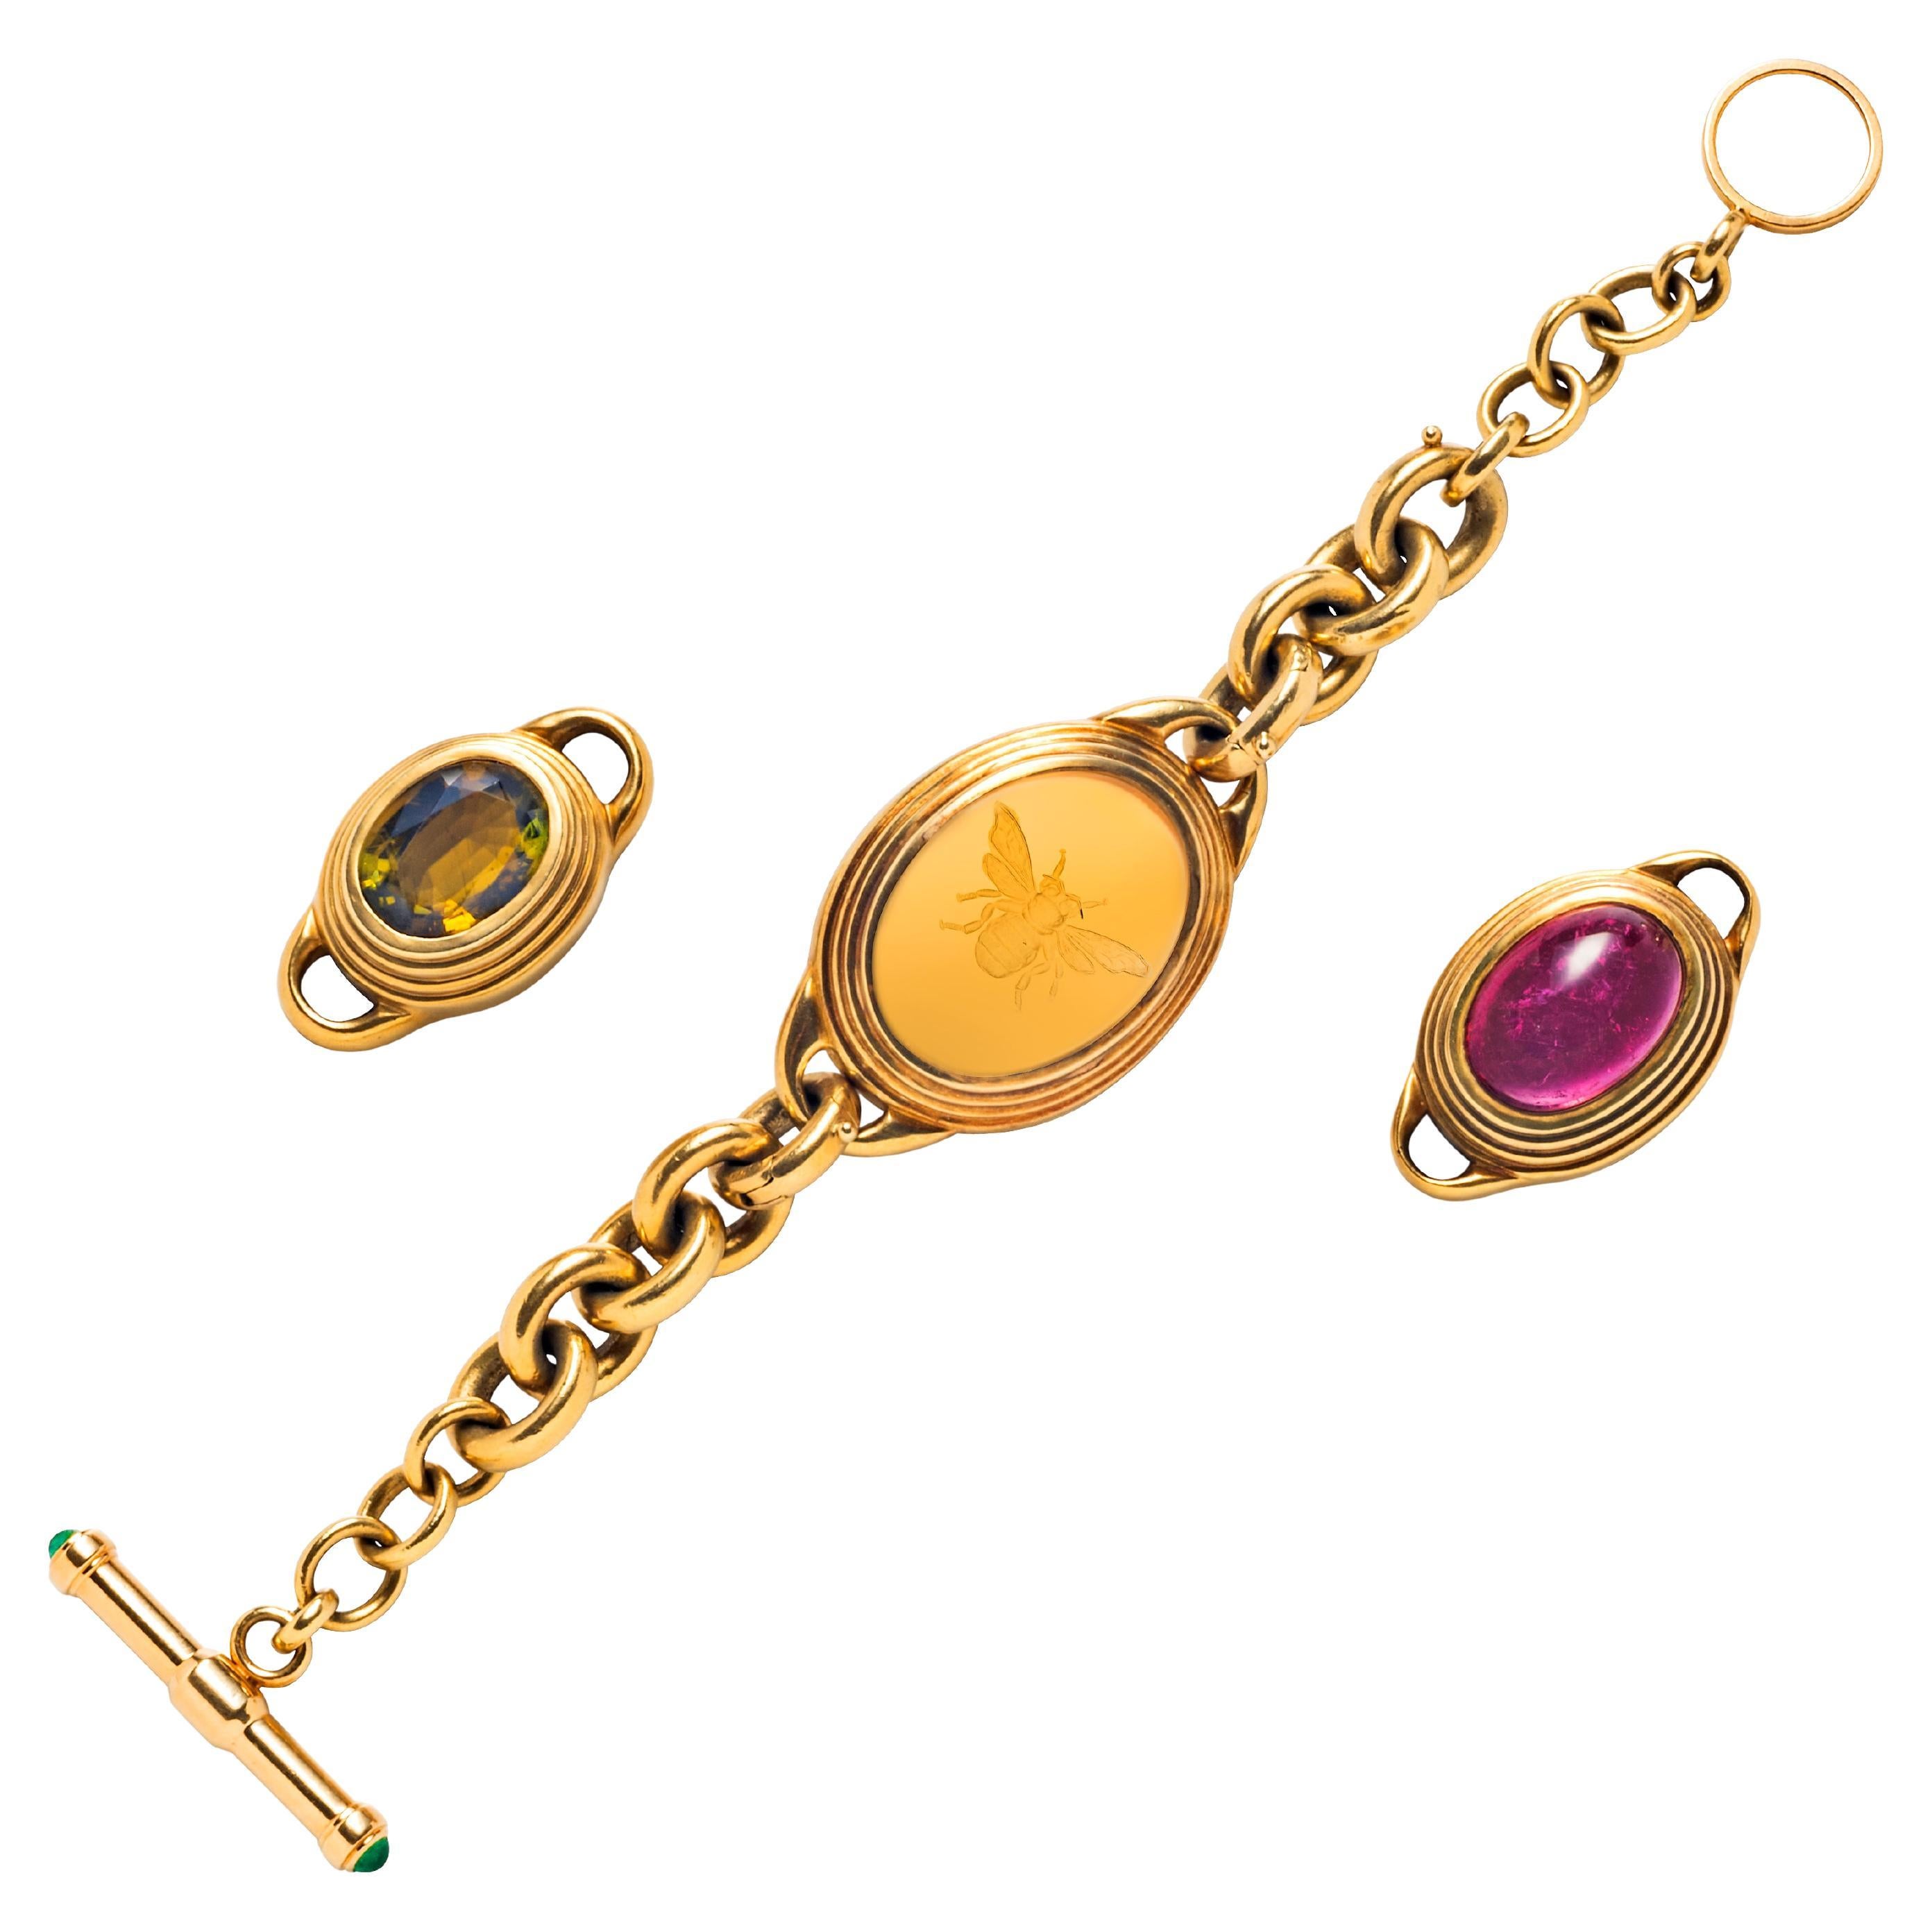 18k Gold Curb Link Bracelet with Interchangeable Citrine and Tourmaline Center For Sale